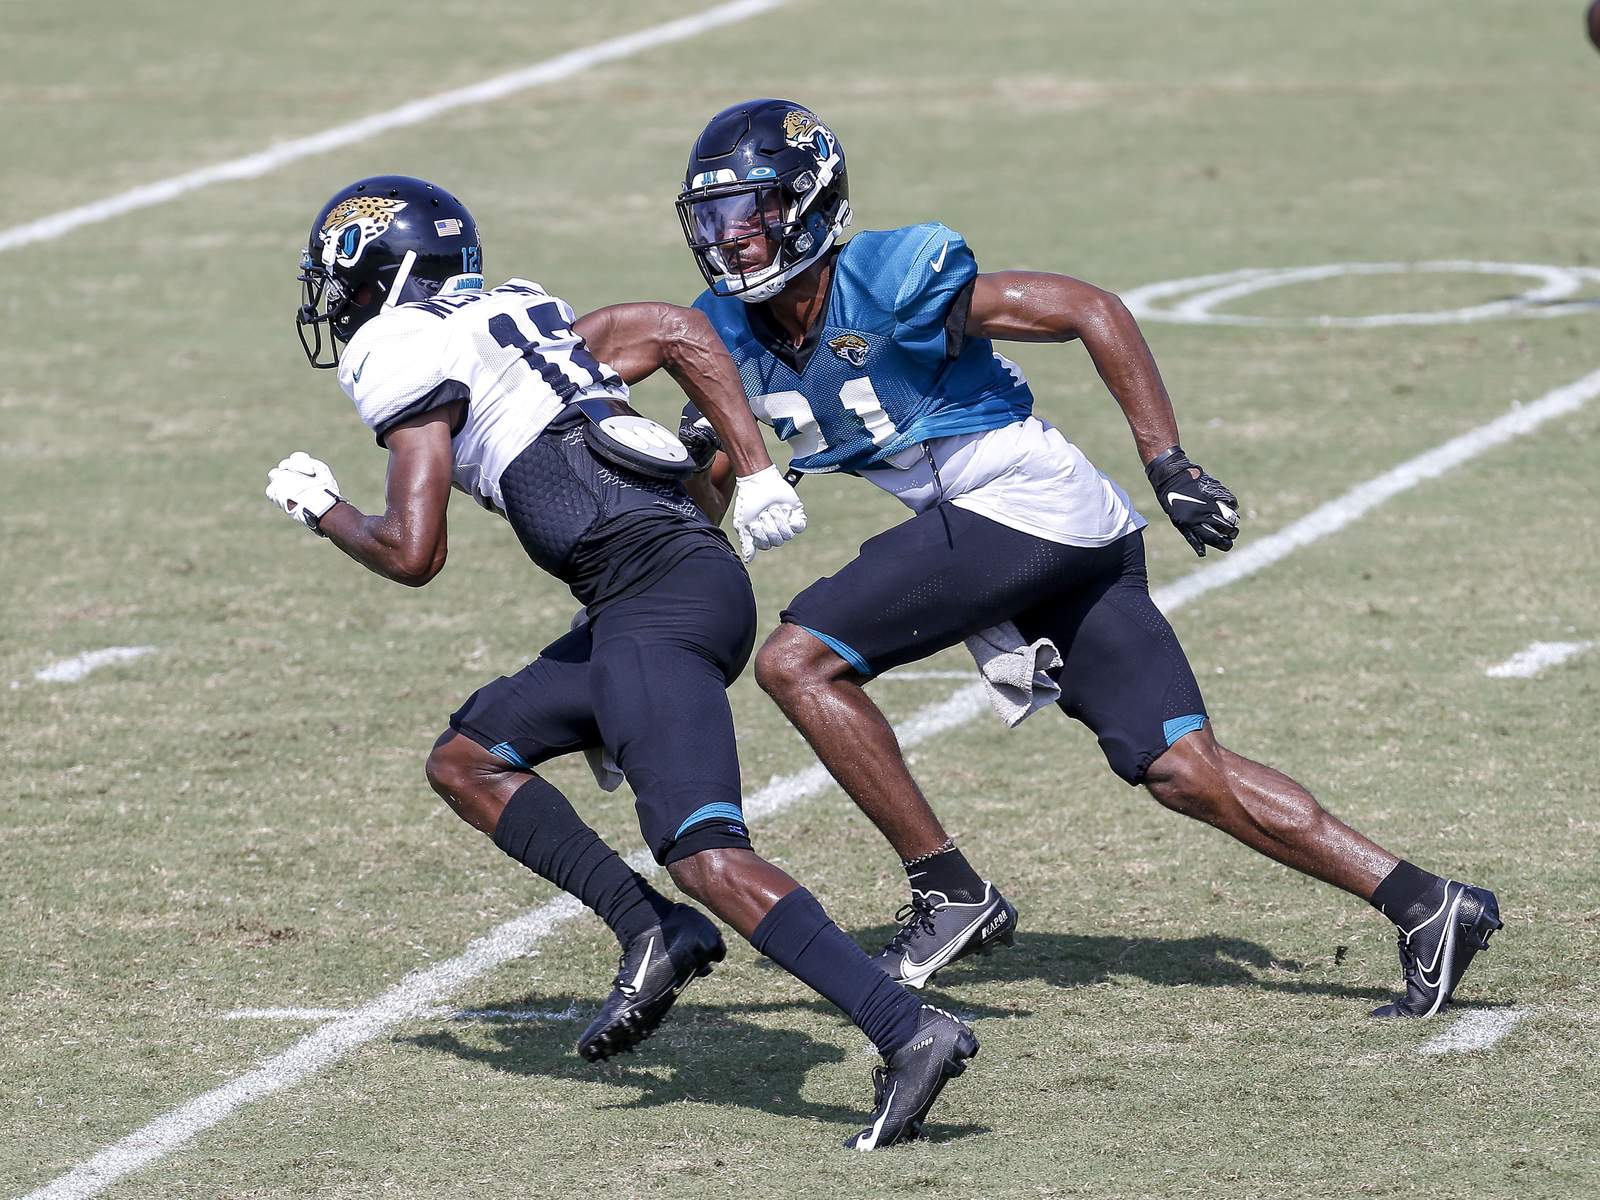 Adjustments to pandemic may have helped Jaguars rookies adjust to life in NFL